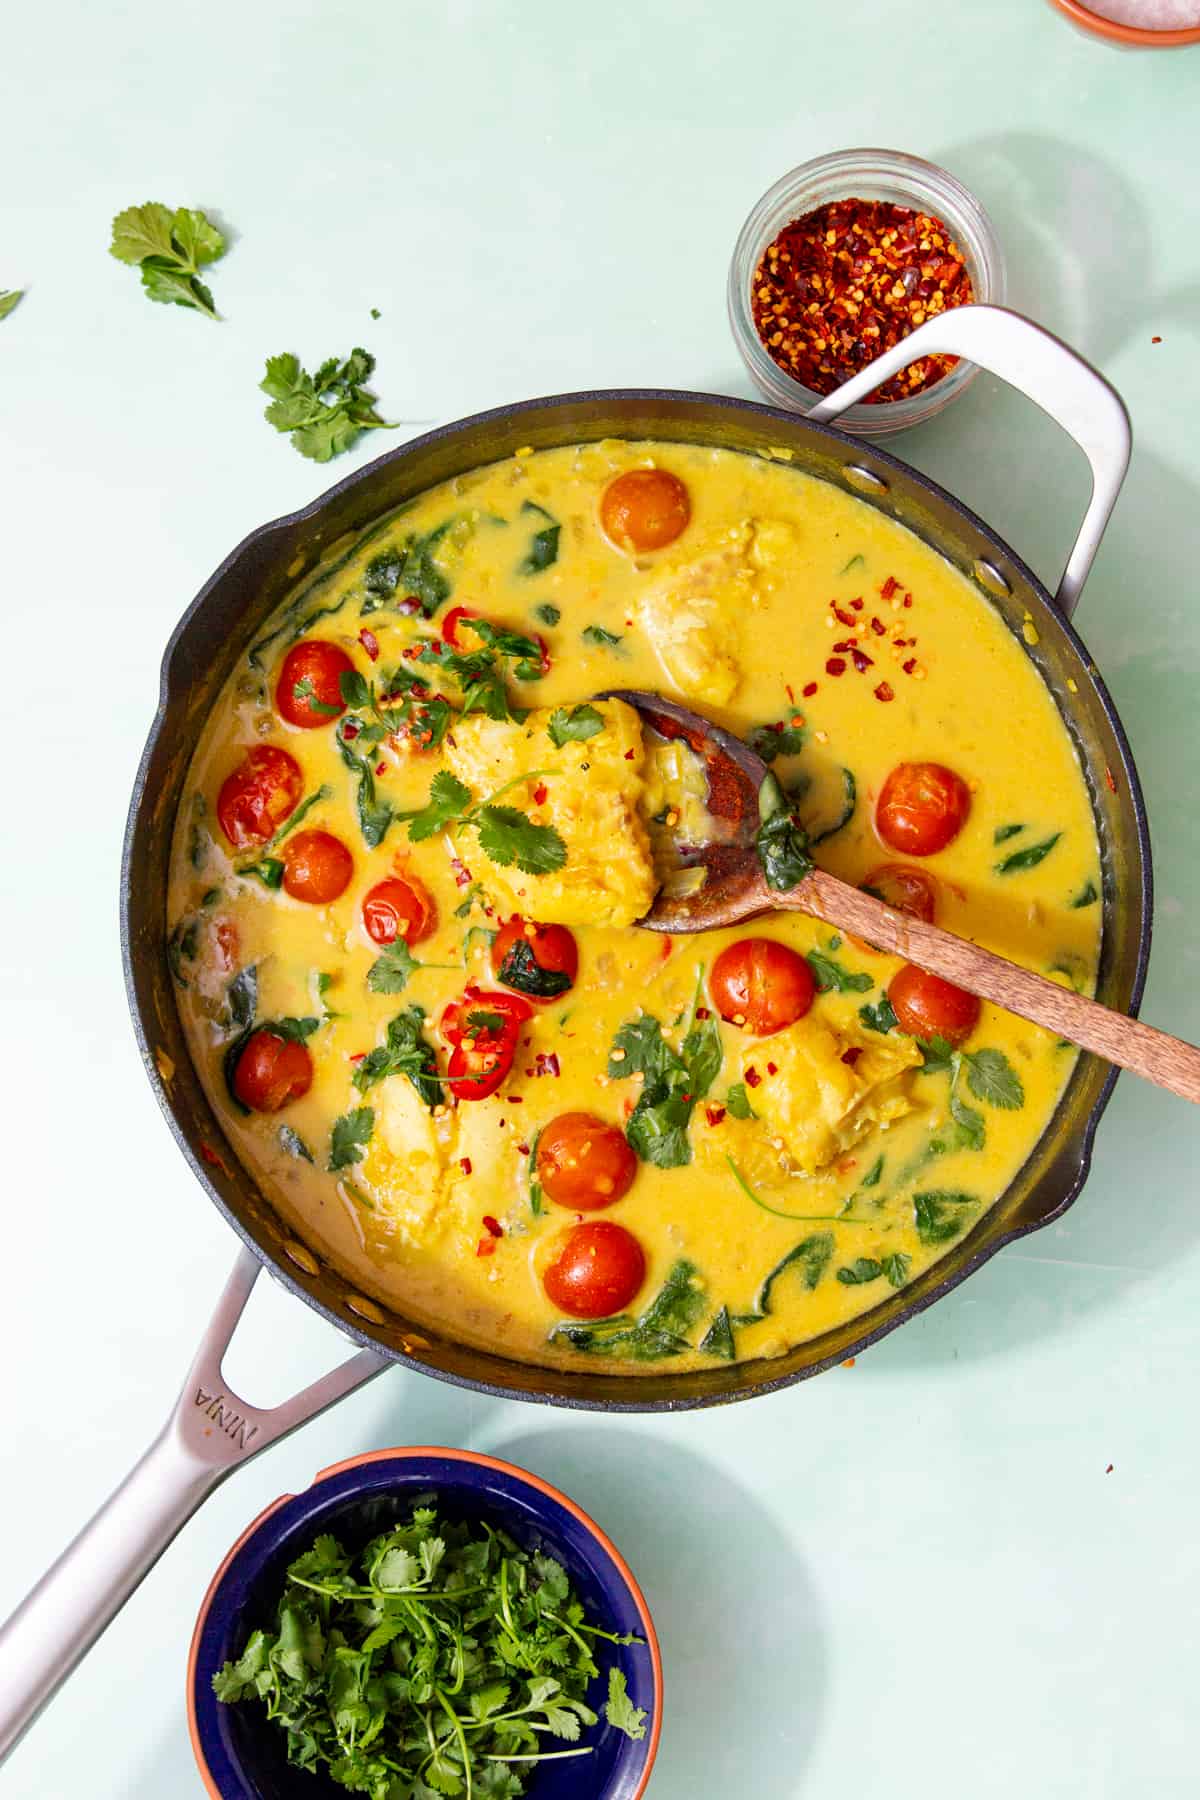 A large pan with a yellowish curry with fish on a wooden spoon showing cherry tomatoes and fresh coriander next to a small bowl of chilli flakes and another small bowl with fresh coriander.